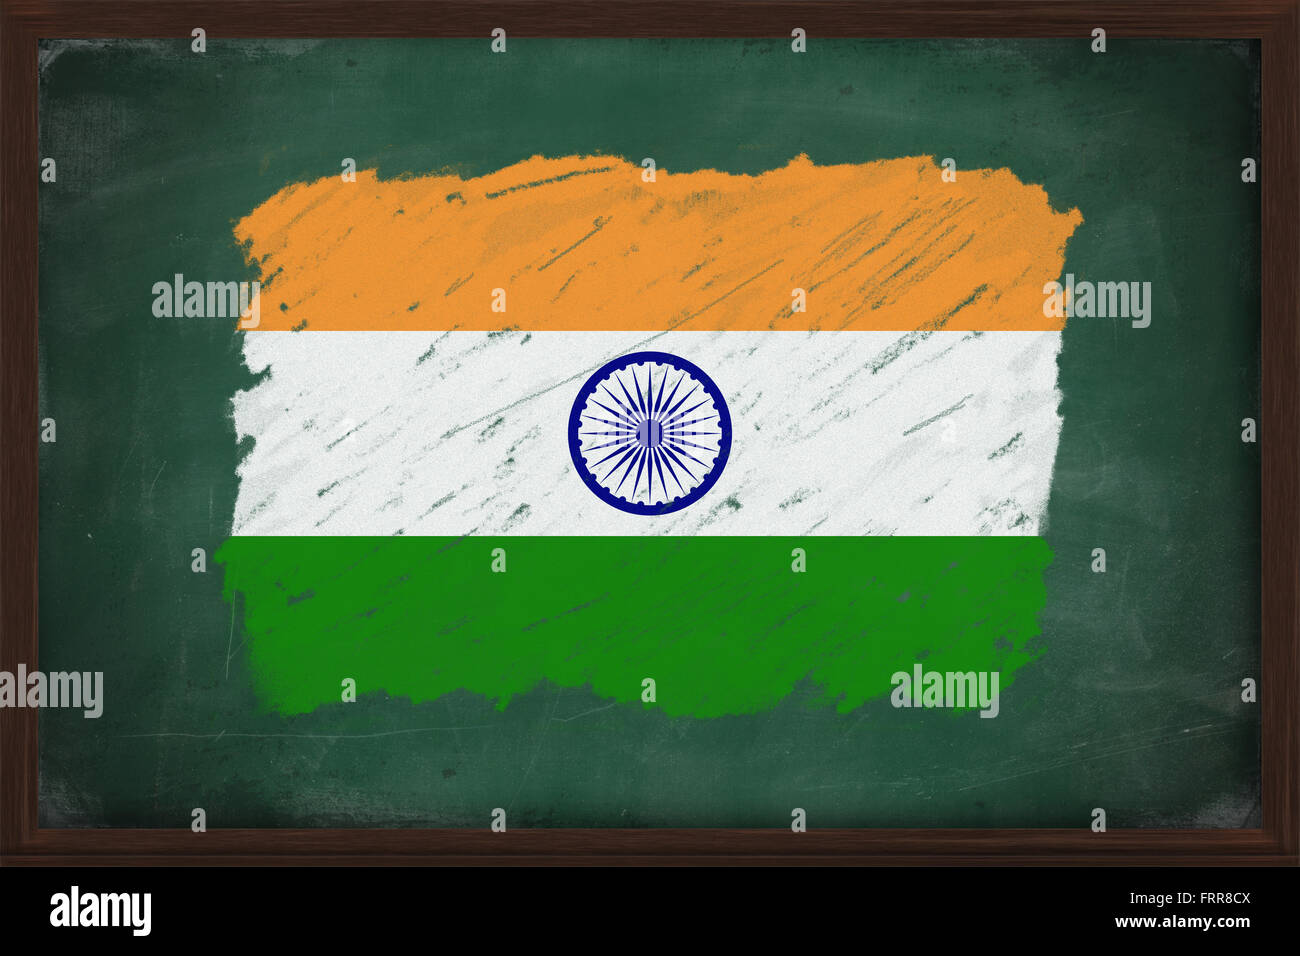 India flag painted with color chalk on old blackboard Stock Photo